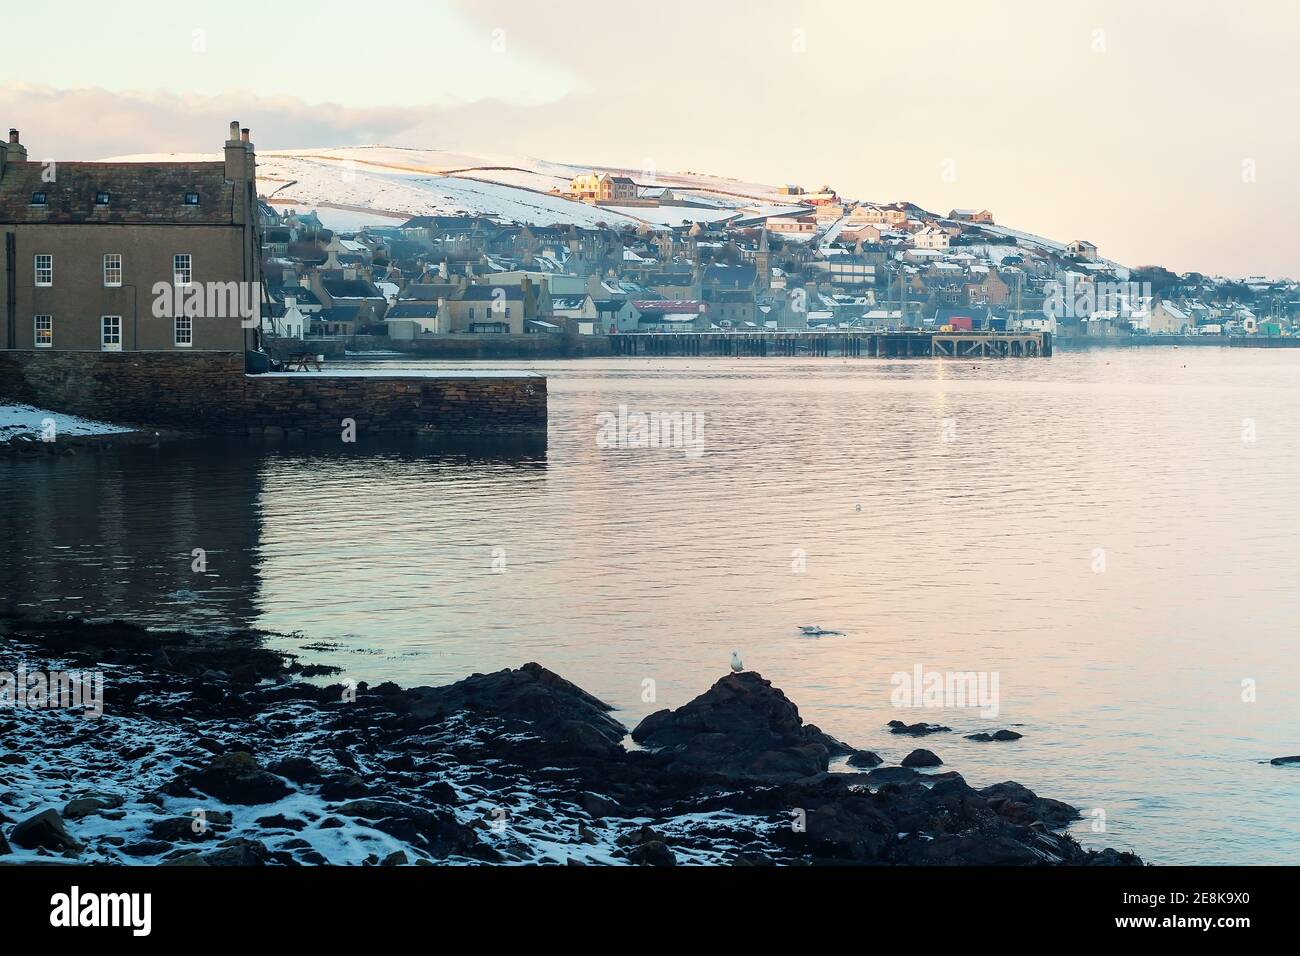 Waterfront view of fishing town Stromness in northern Scotland on Orkney islands with traditional stone built houses and private piers in winter mist Stock Photo